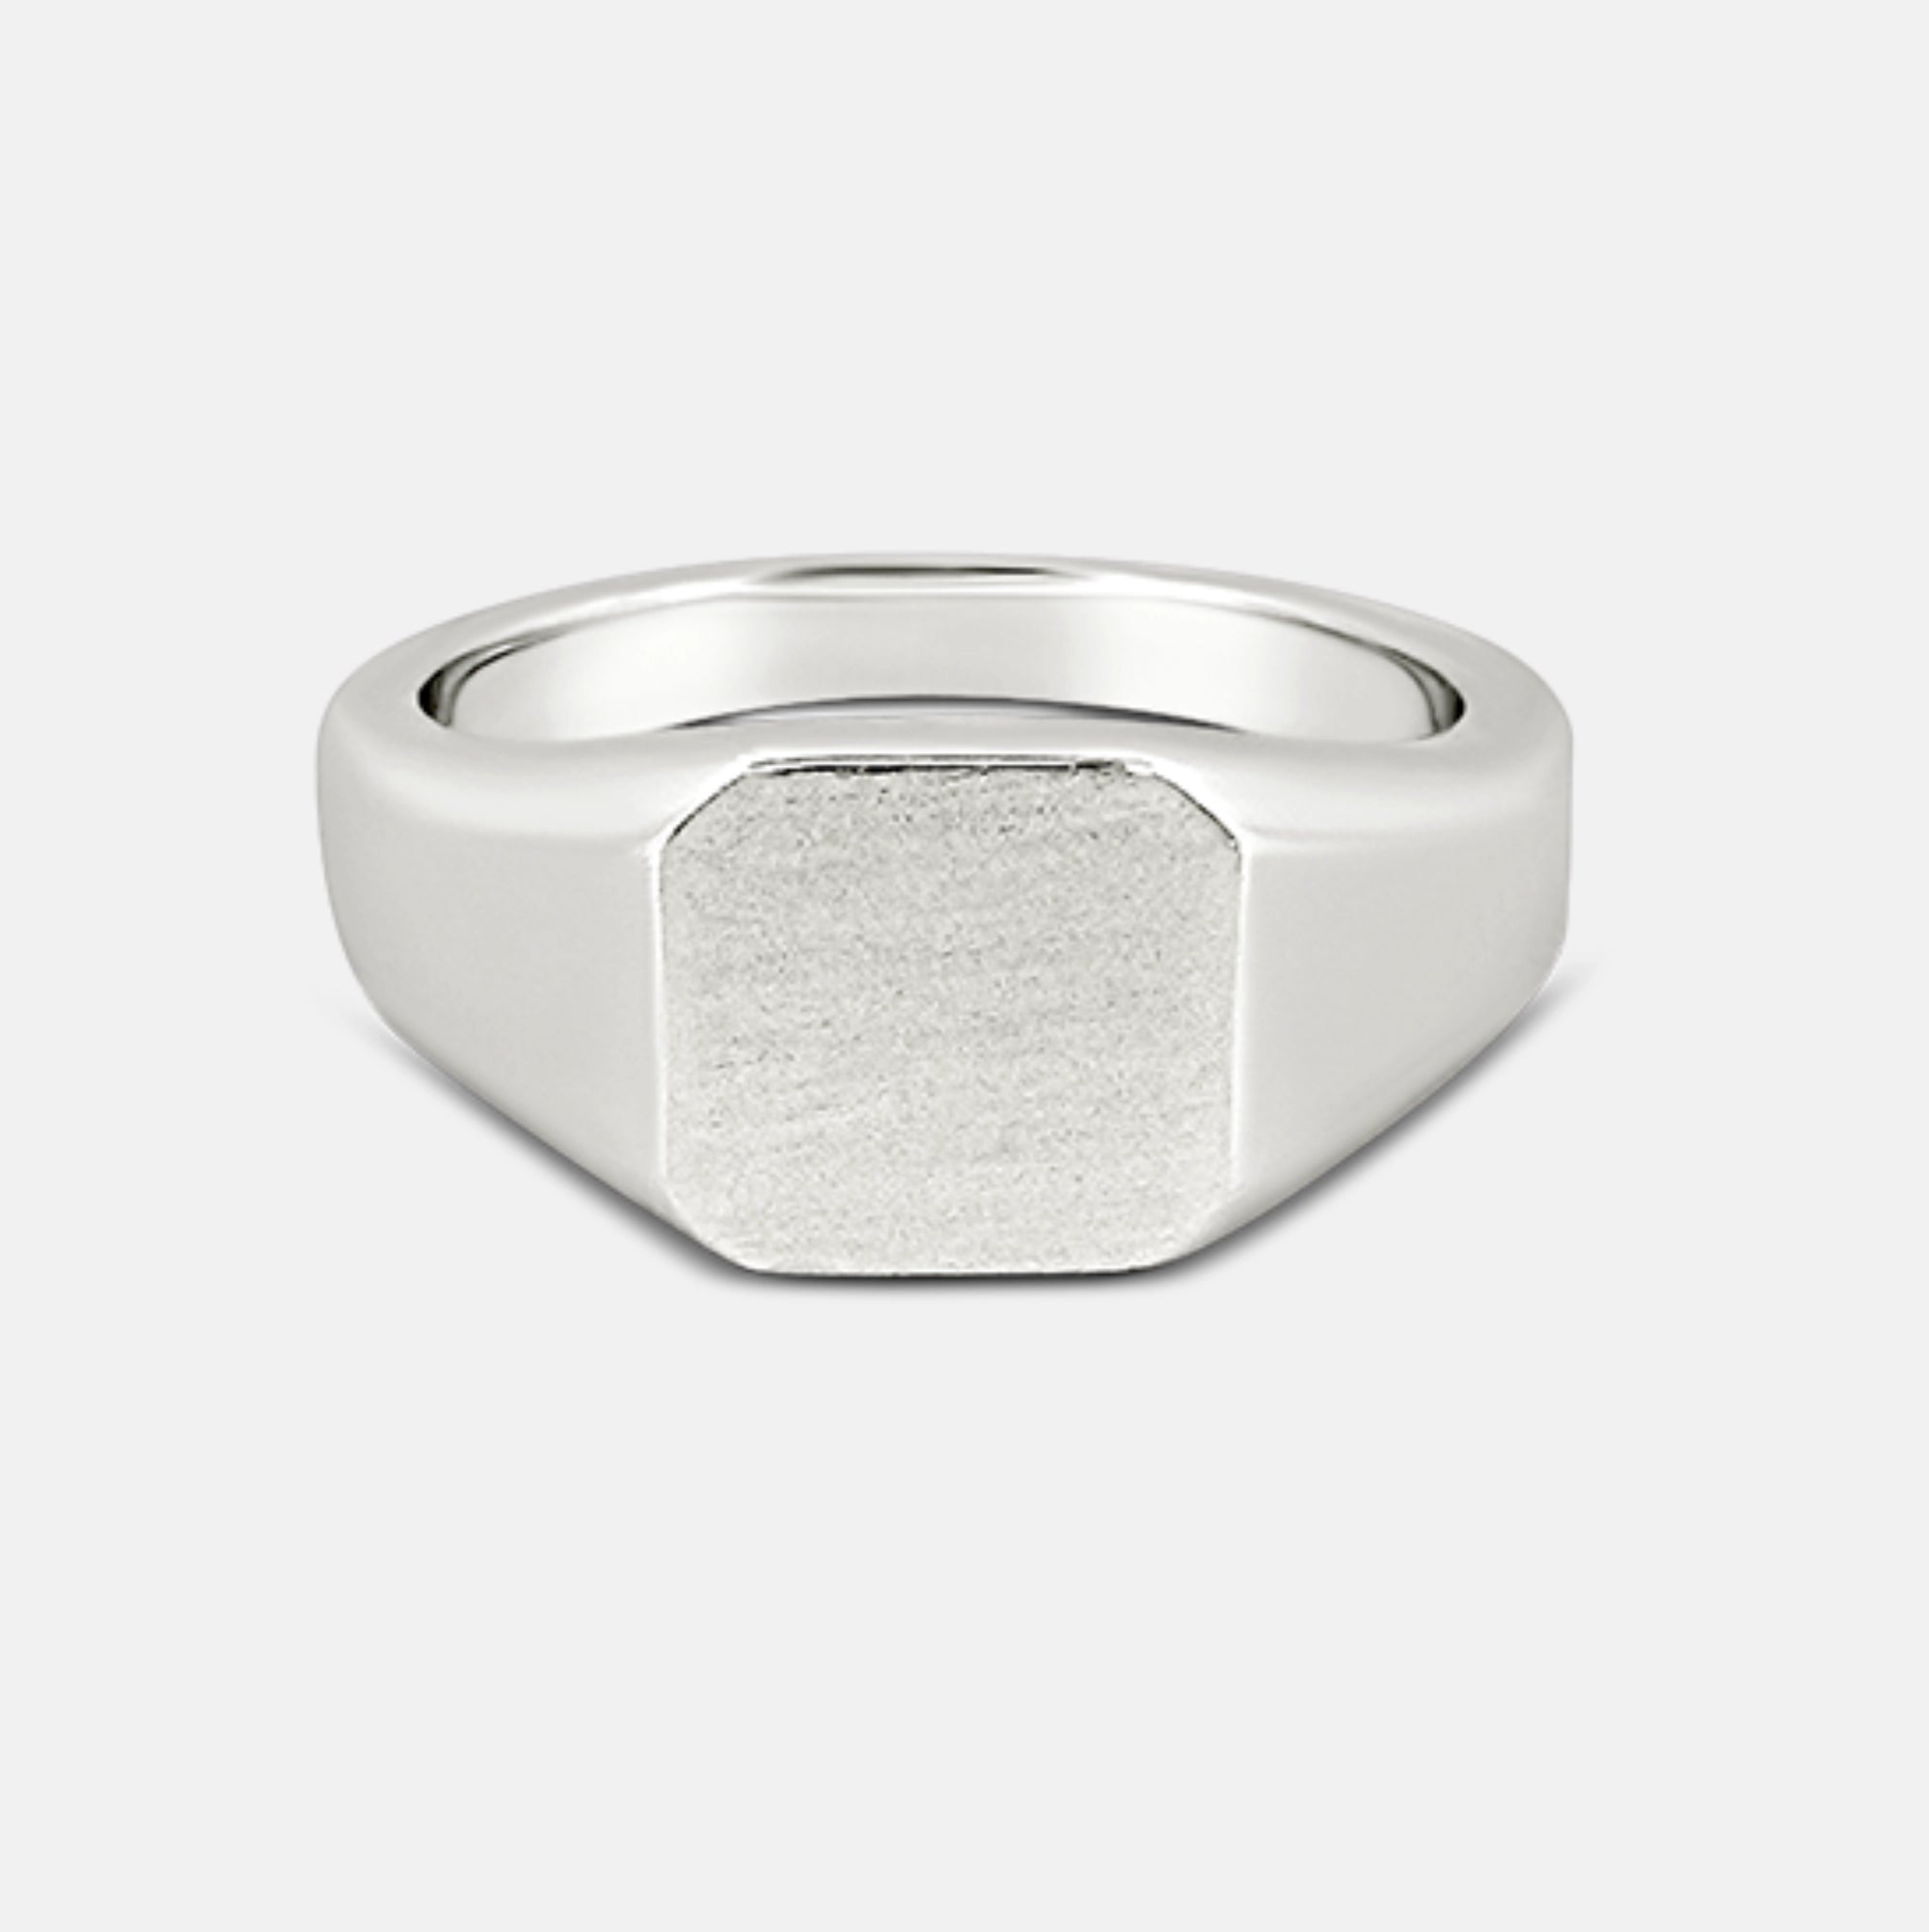 front view of 925 silver square signet ring with rhodium plating